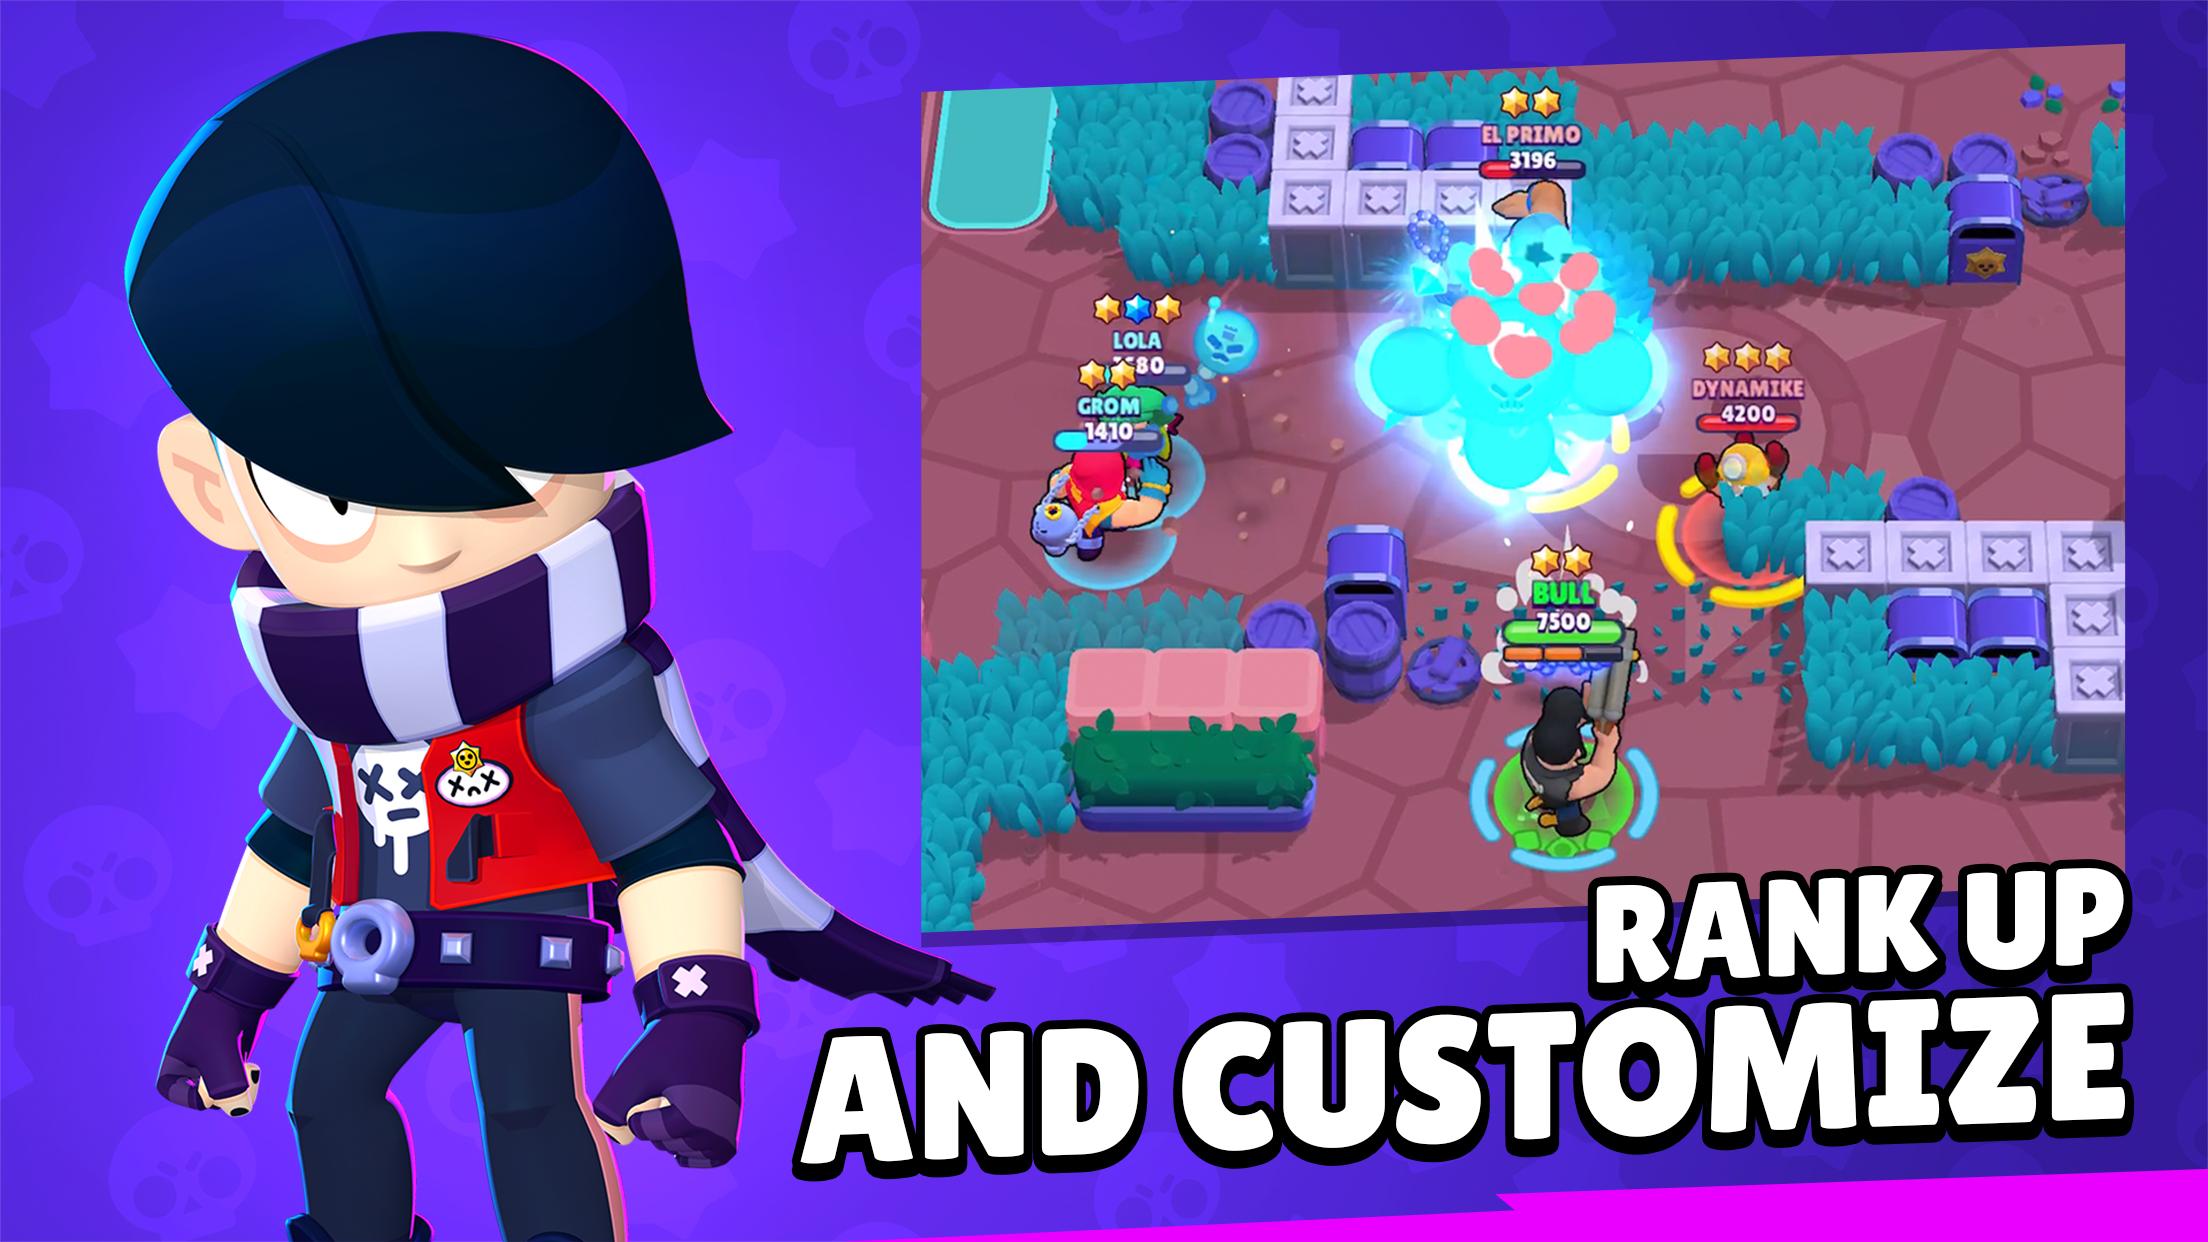 Brawl Stars APK Download for Android Free